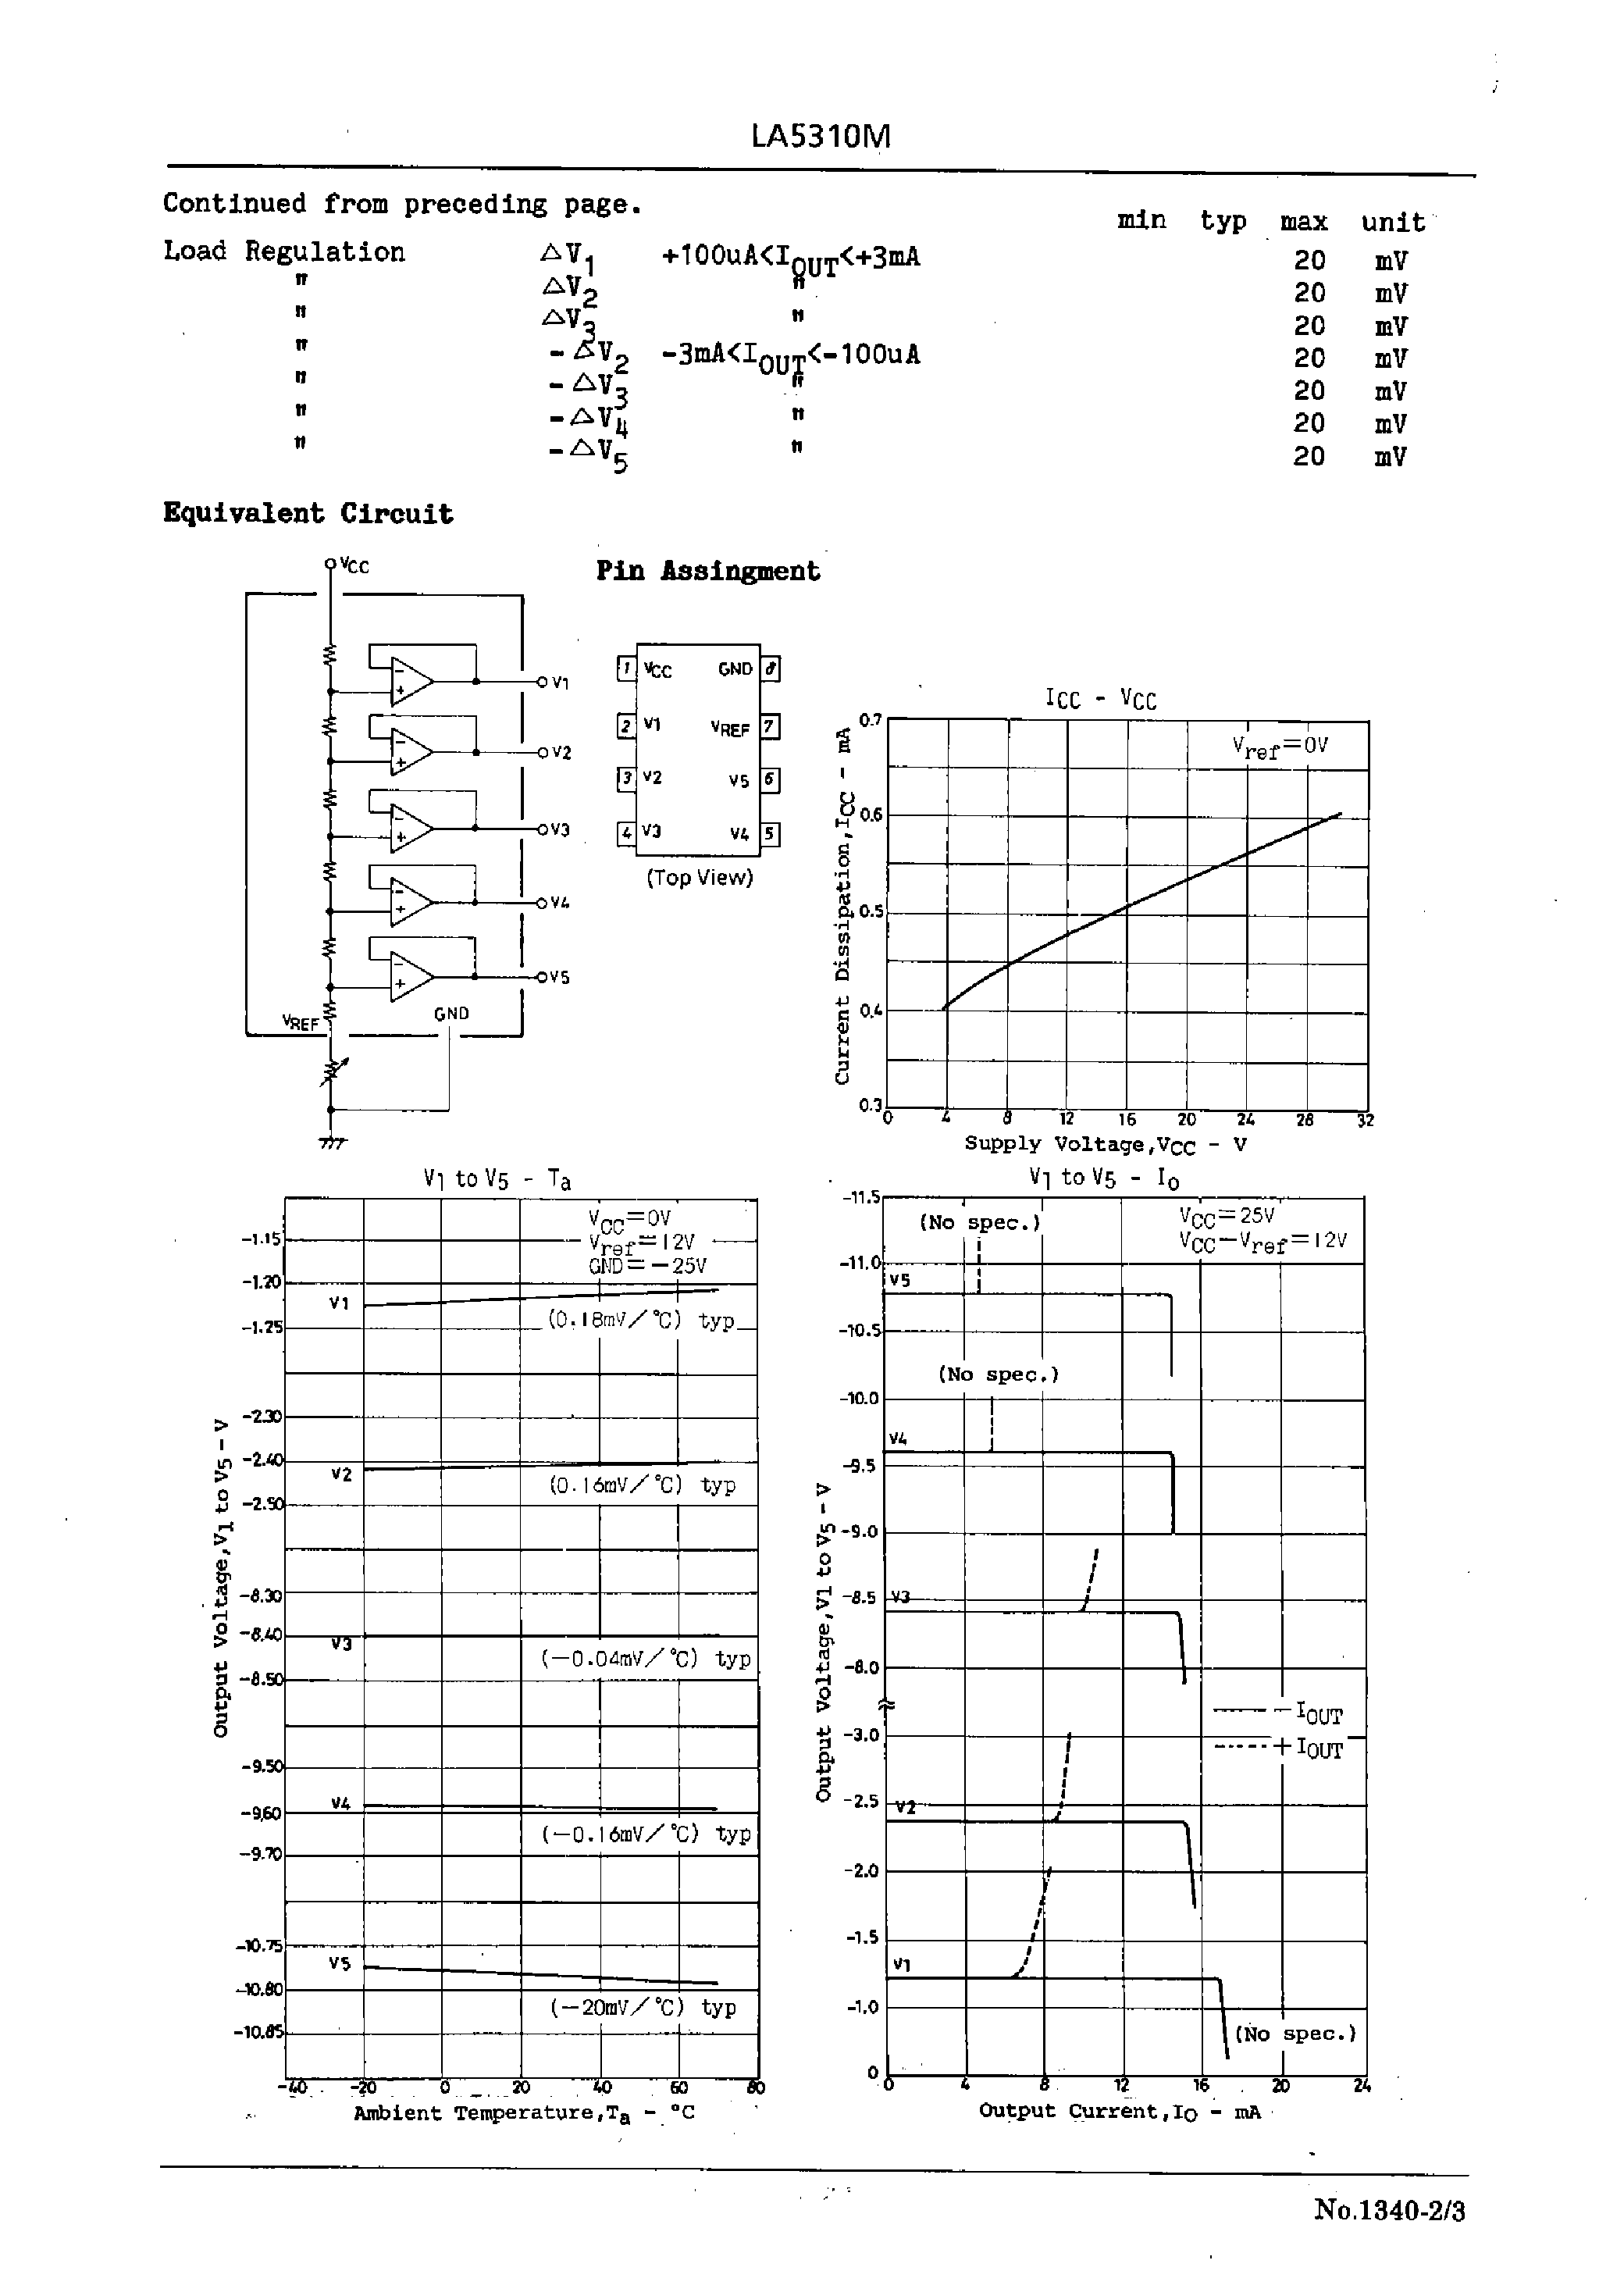 Datasheet LA5310M - Voltage Drivider for LCD Applications page 2